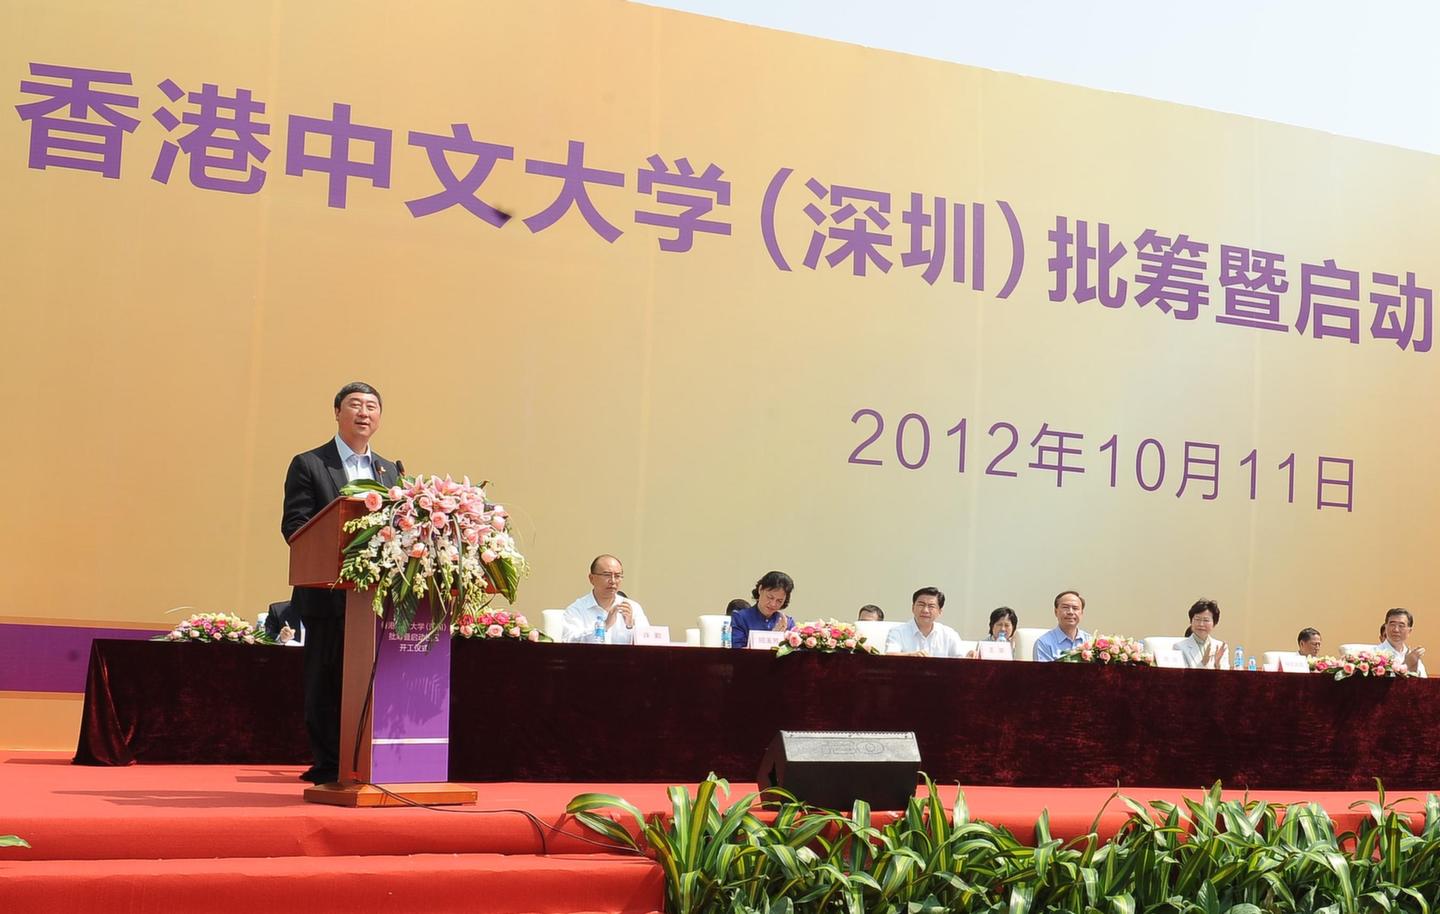 Ceremony for the planning of CUHK (Shenzhen) (2012)